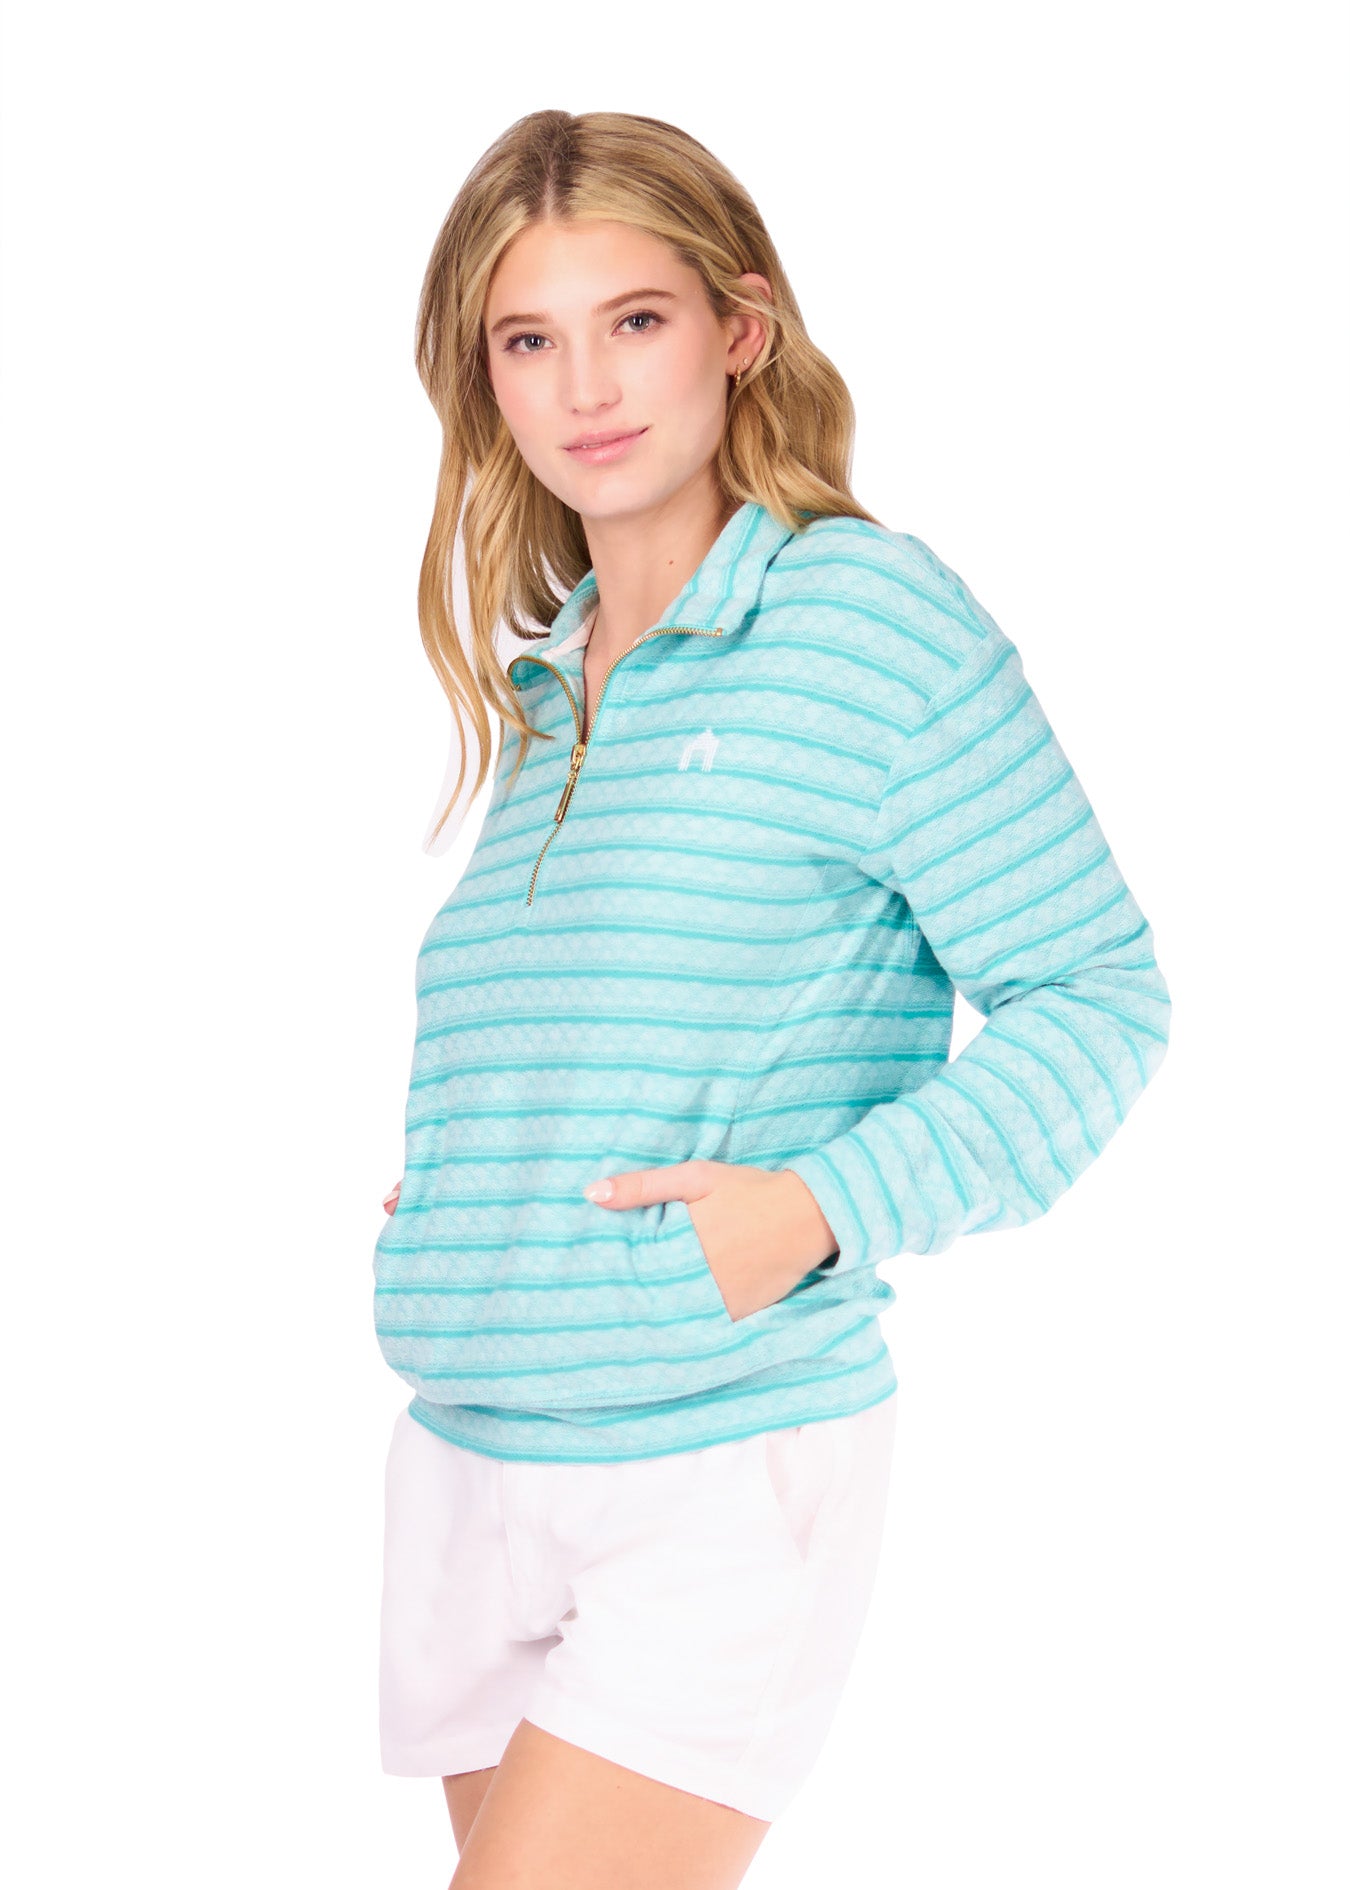 Side of woman in Aqua Half Zip Pullover and white shorts